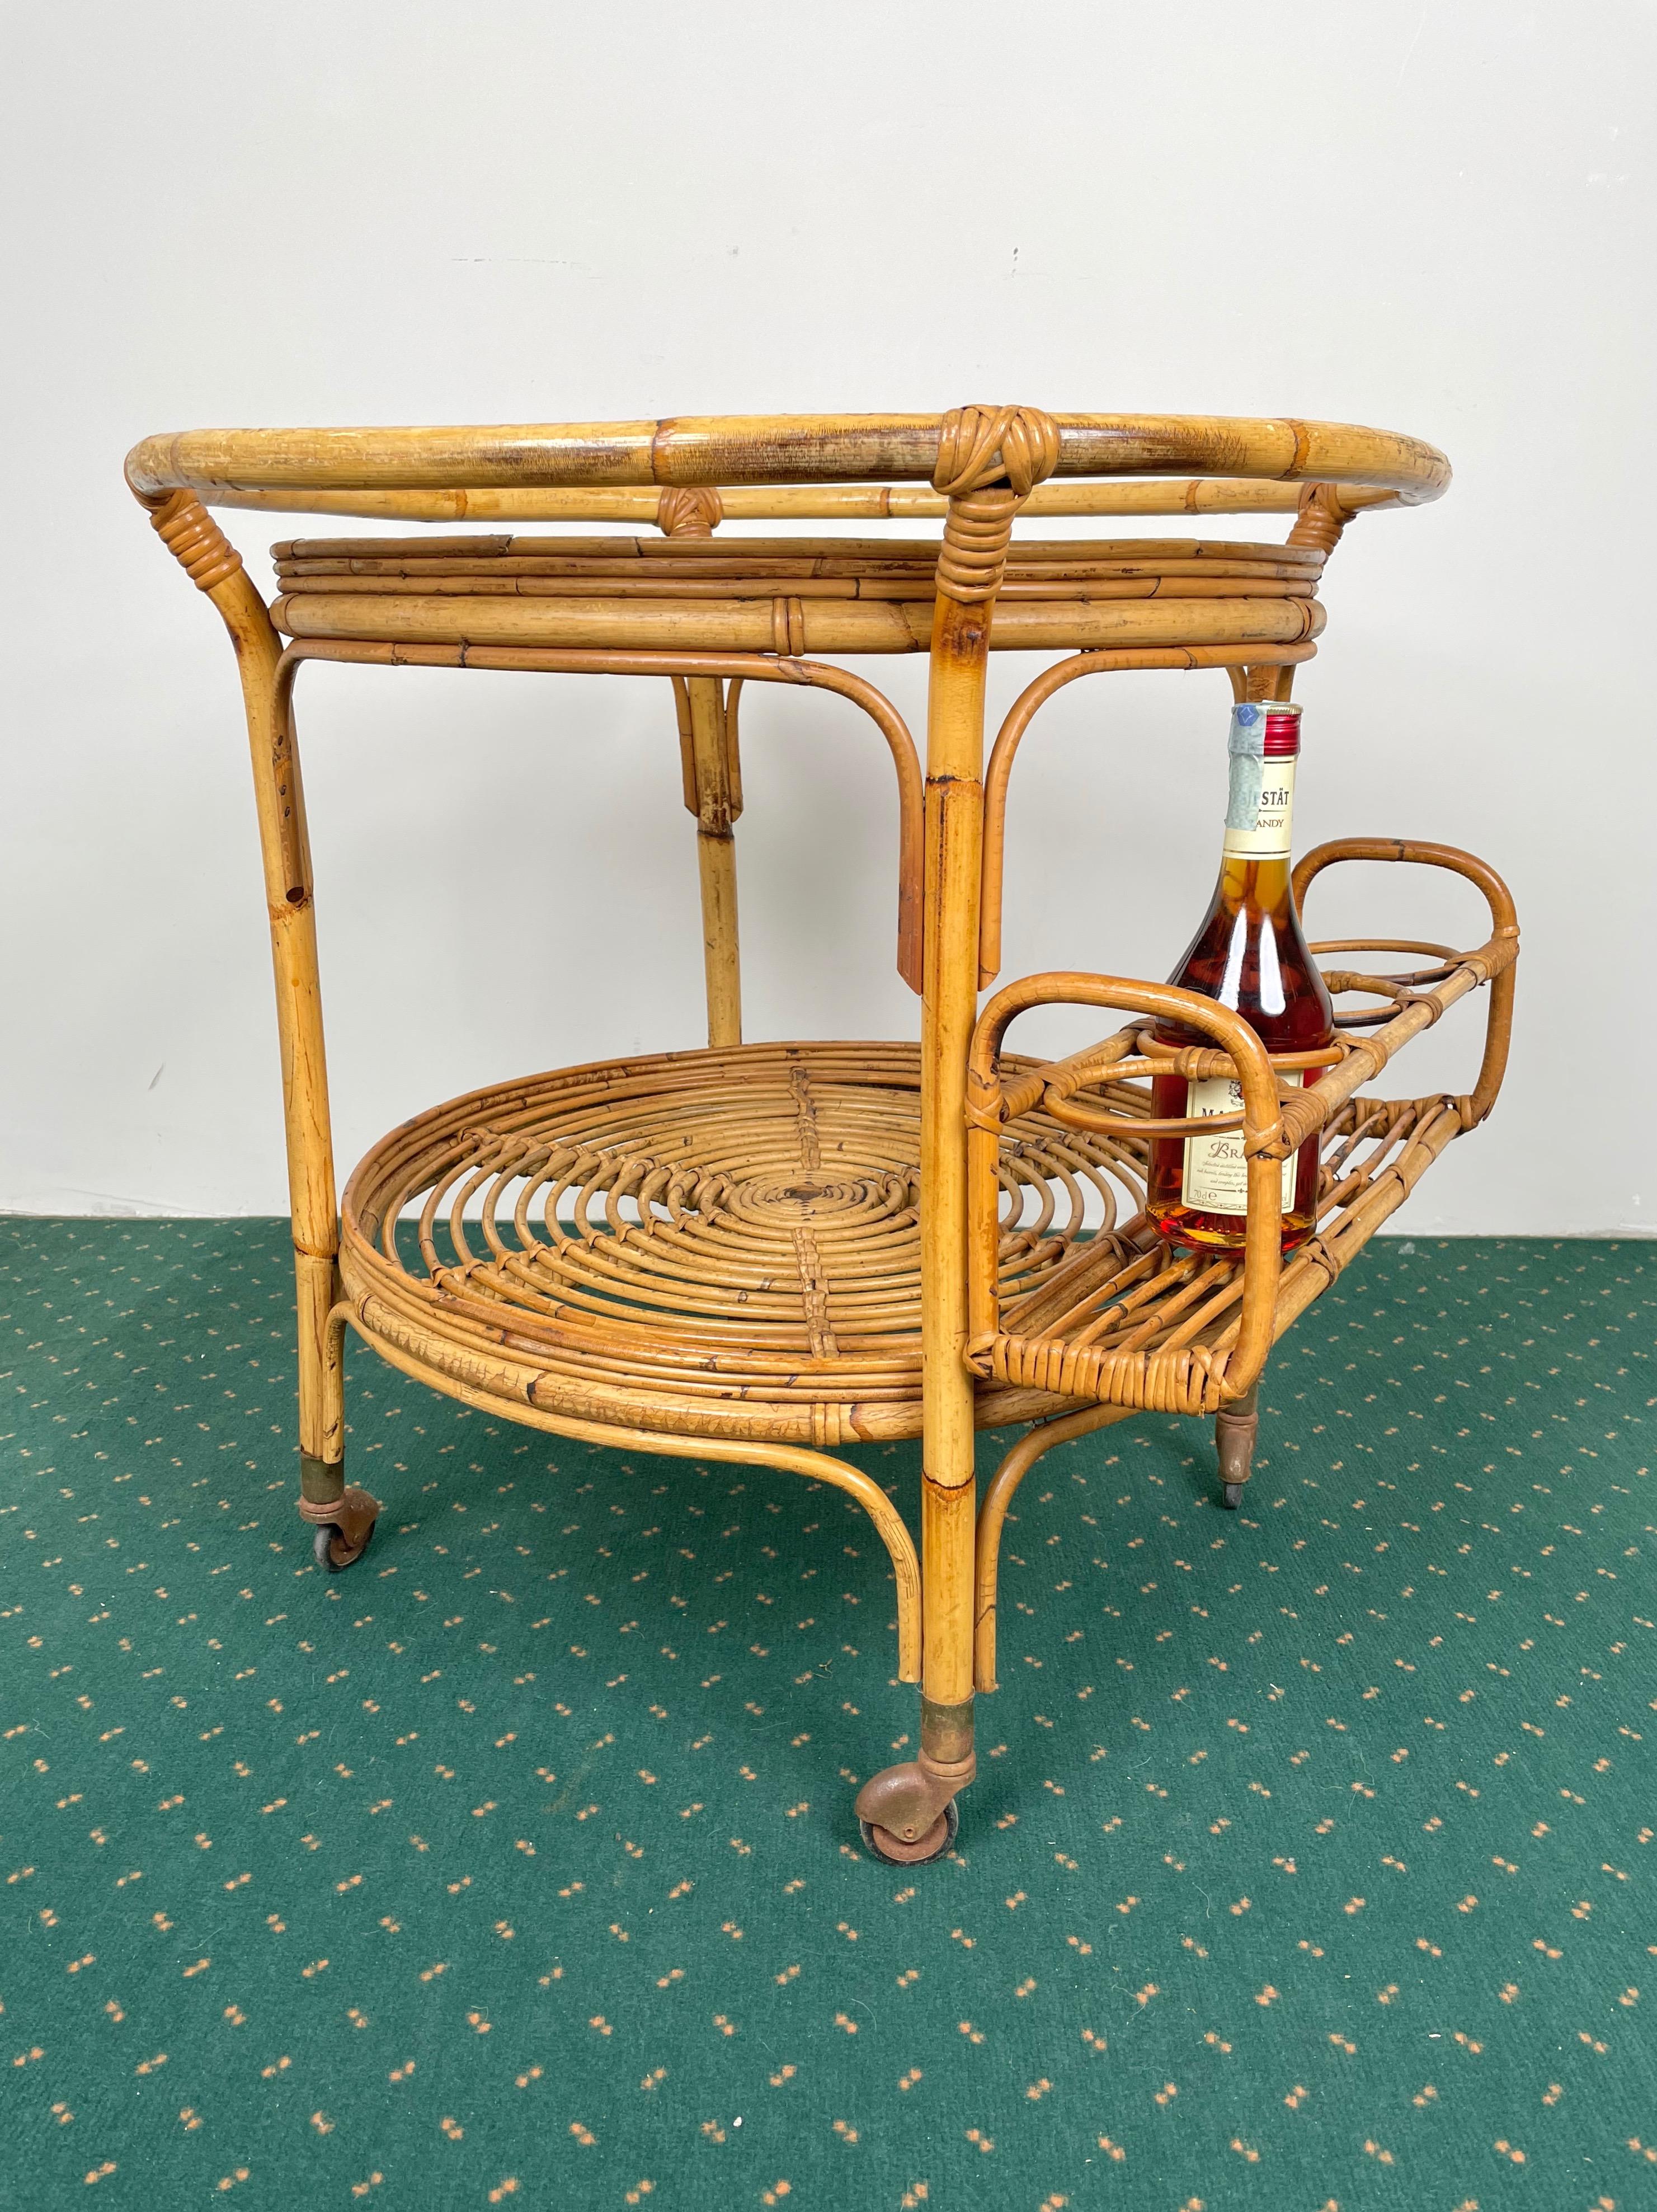 Bamboo & Rattan Round Serving Bar Cart Trolley, Italy, 1960s For Sale 5